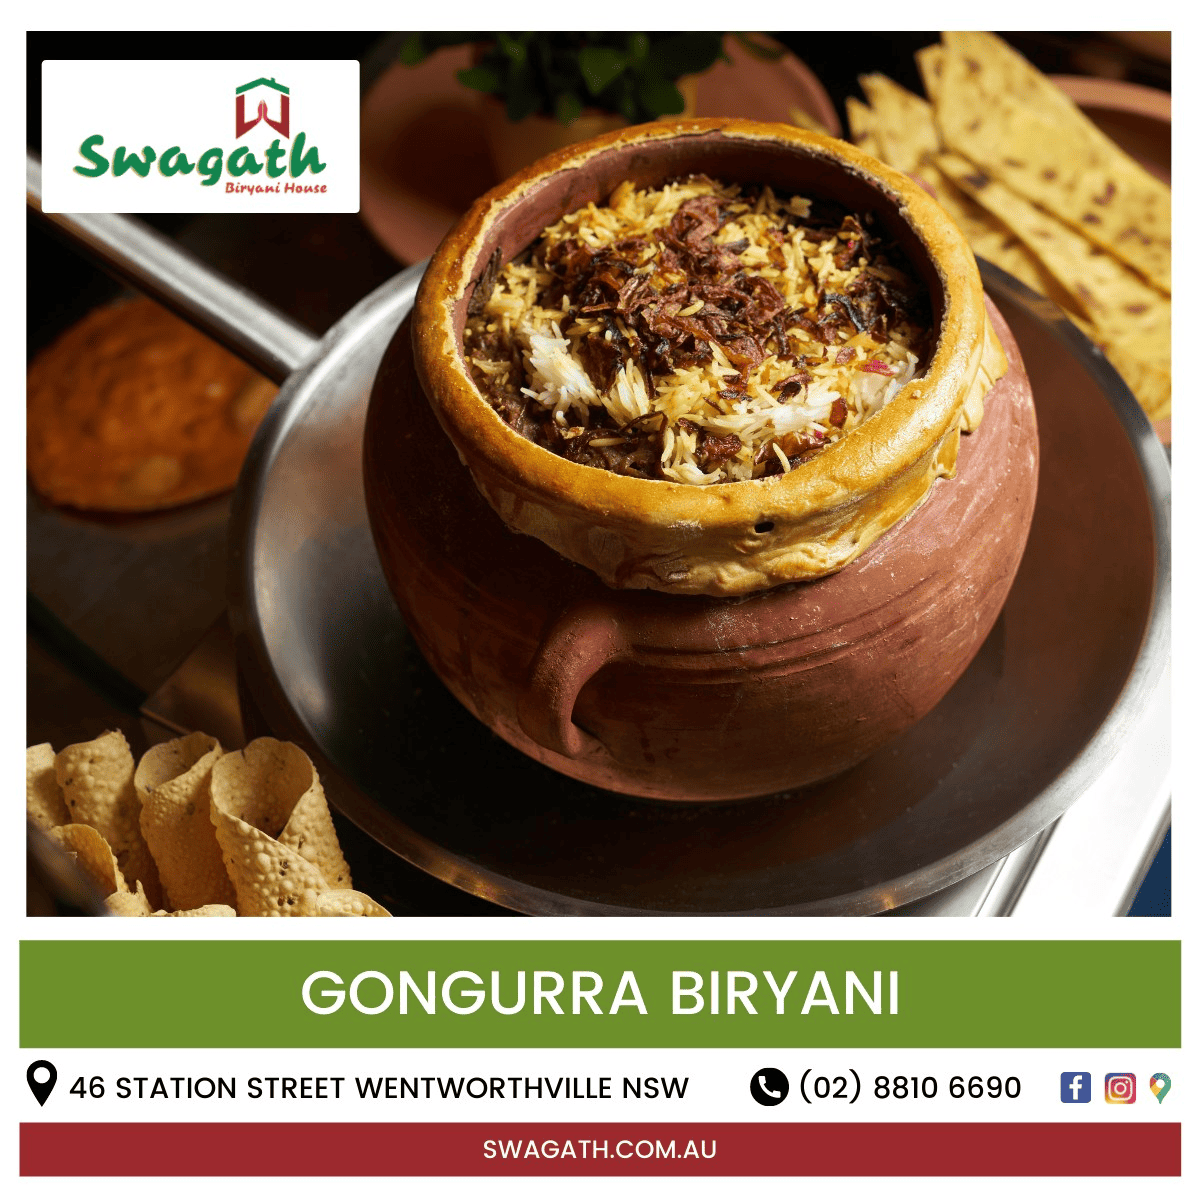 Gongura Biryani - A vibrant plate of flavourful rice with gongura leaves, a South Indian delicacy